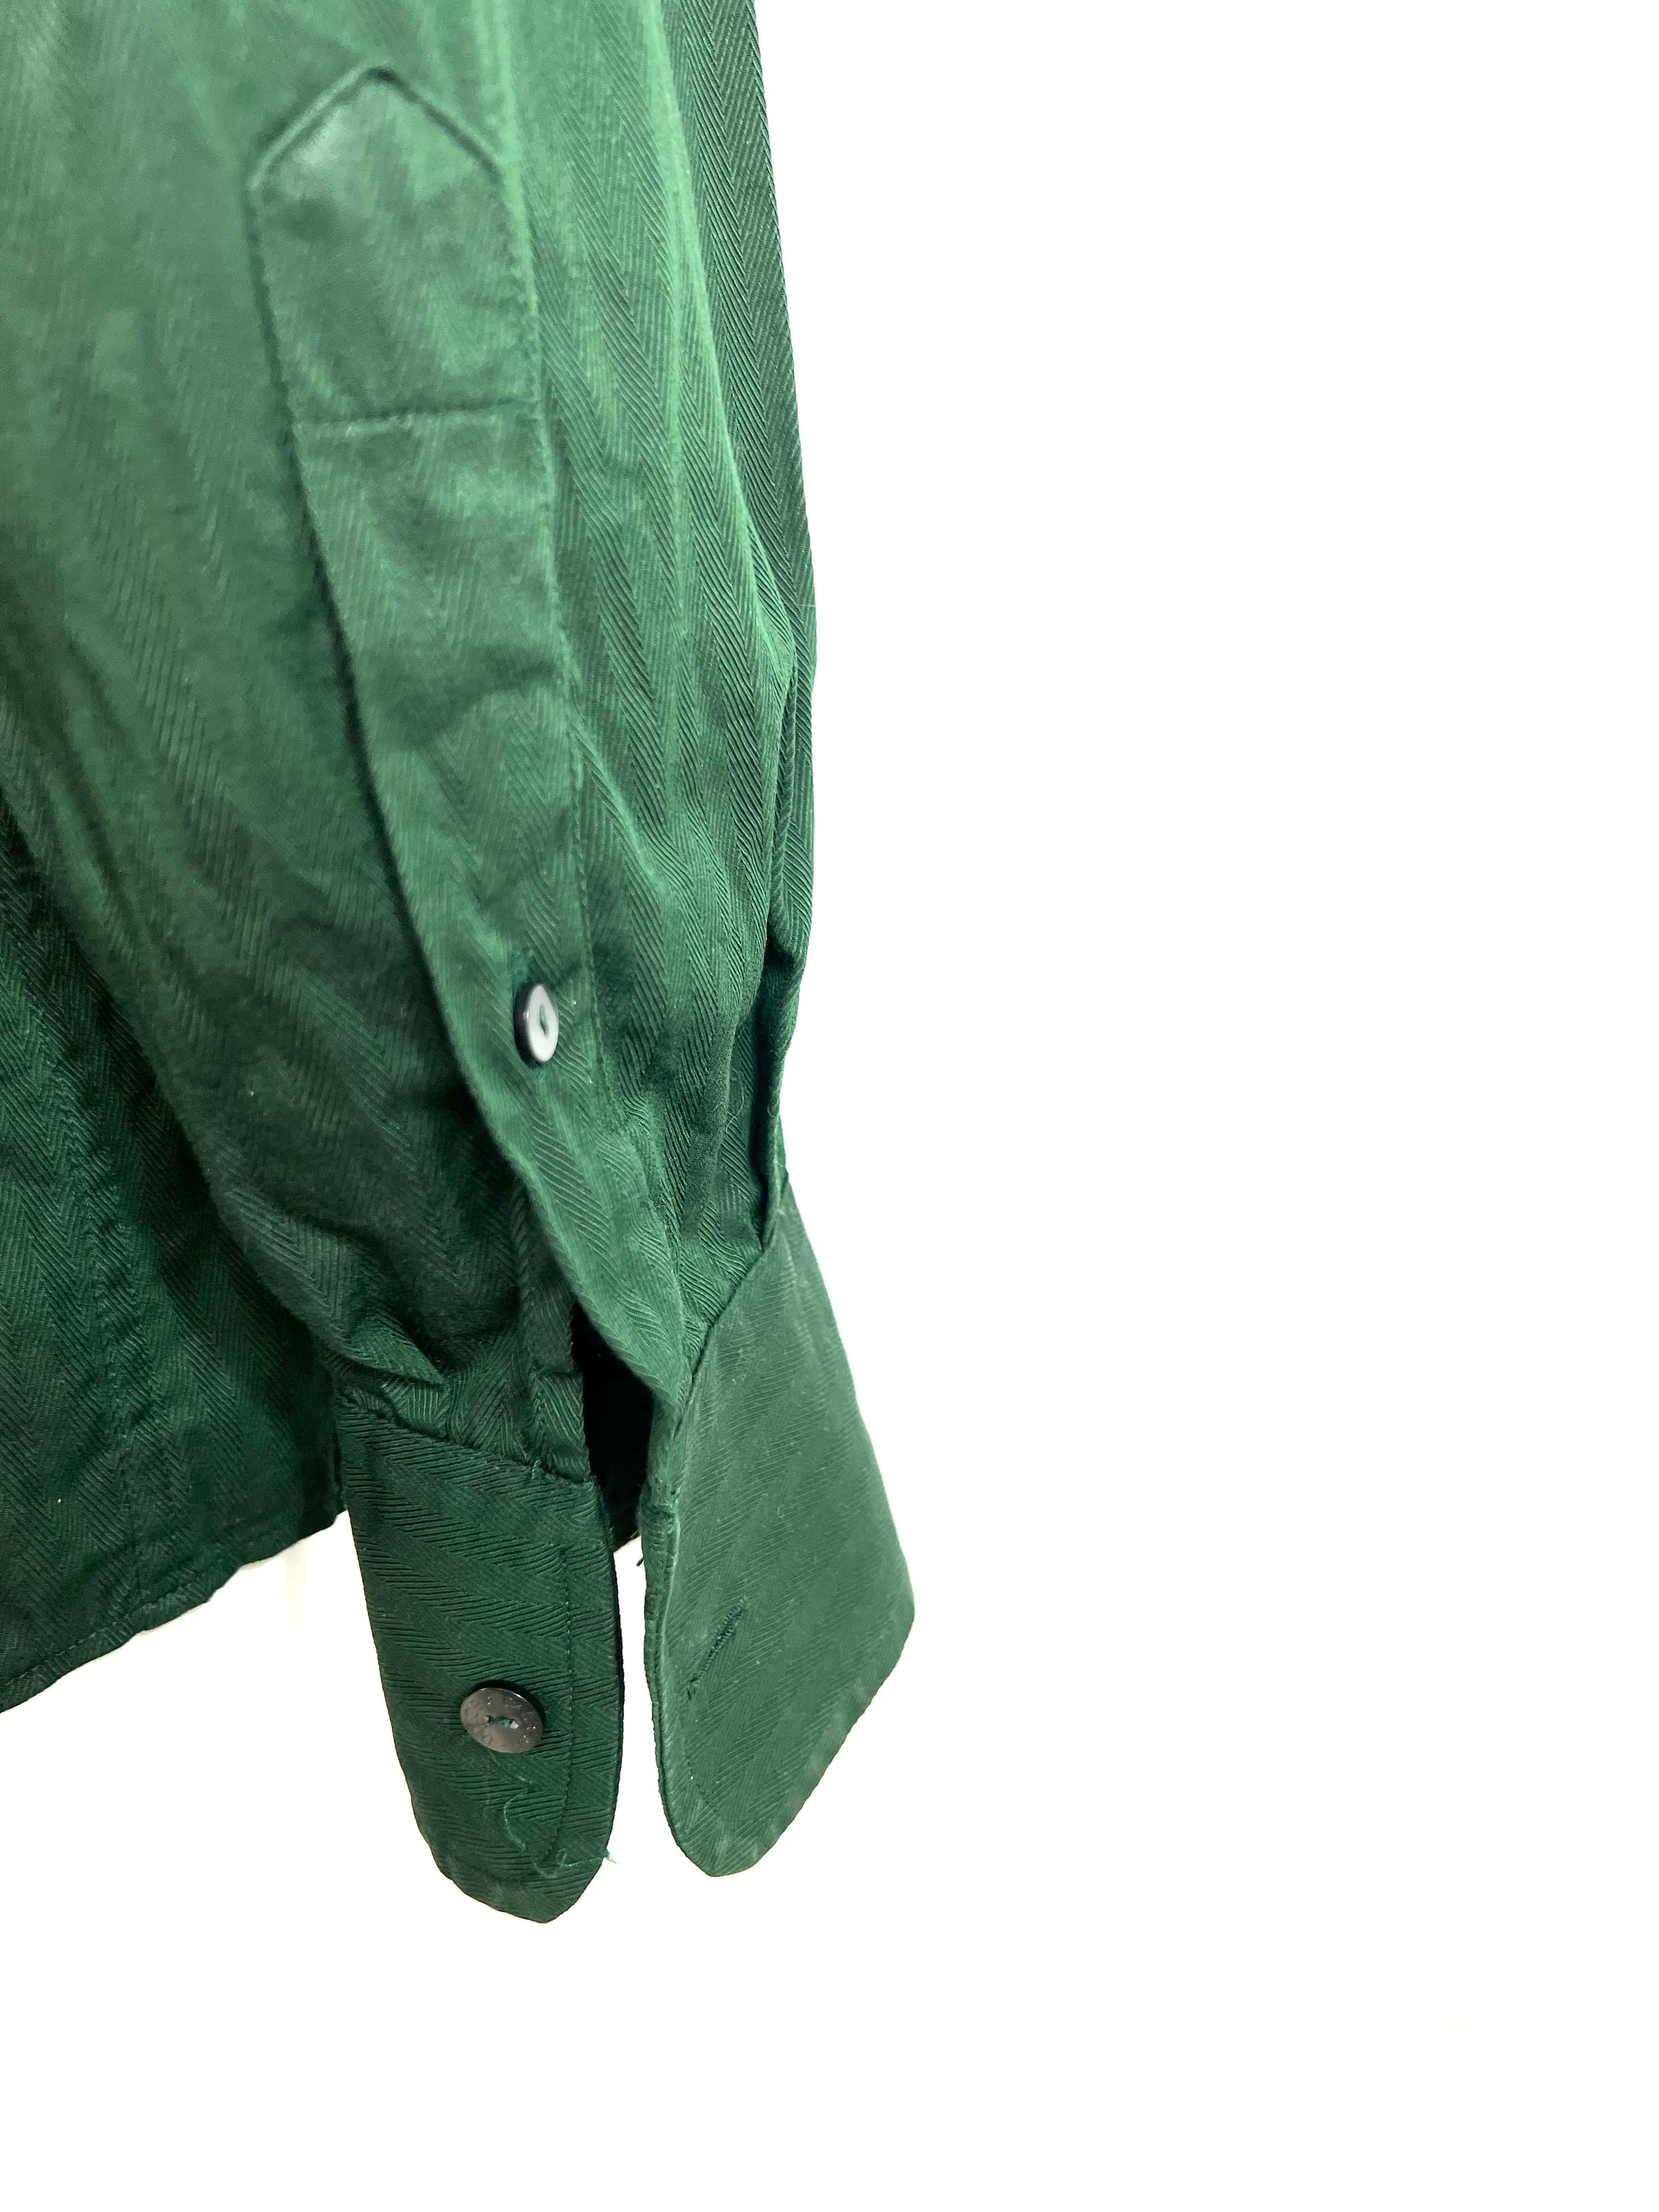 Dolce & Gabbana Green Button Down Shirt, Size 18/ 44 In Excellent Condition For Sale In Beverly Hills, CA